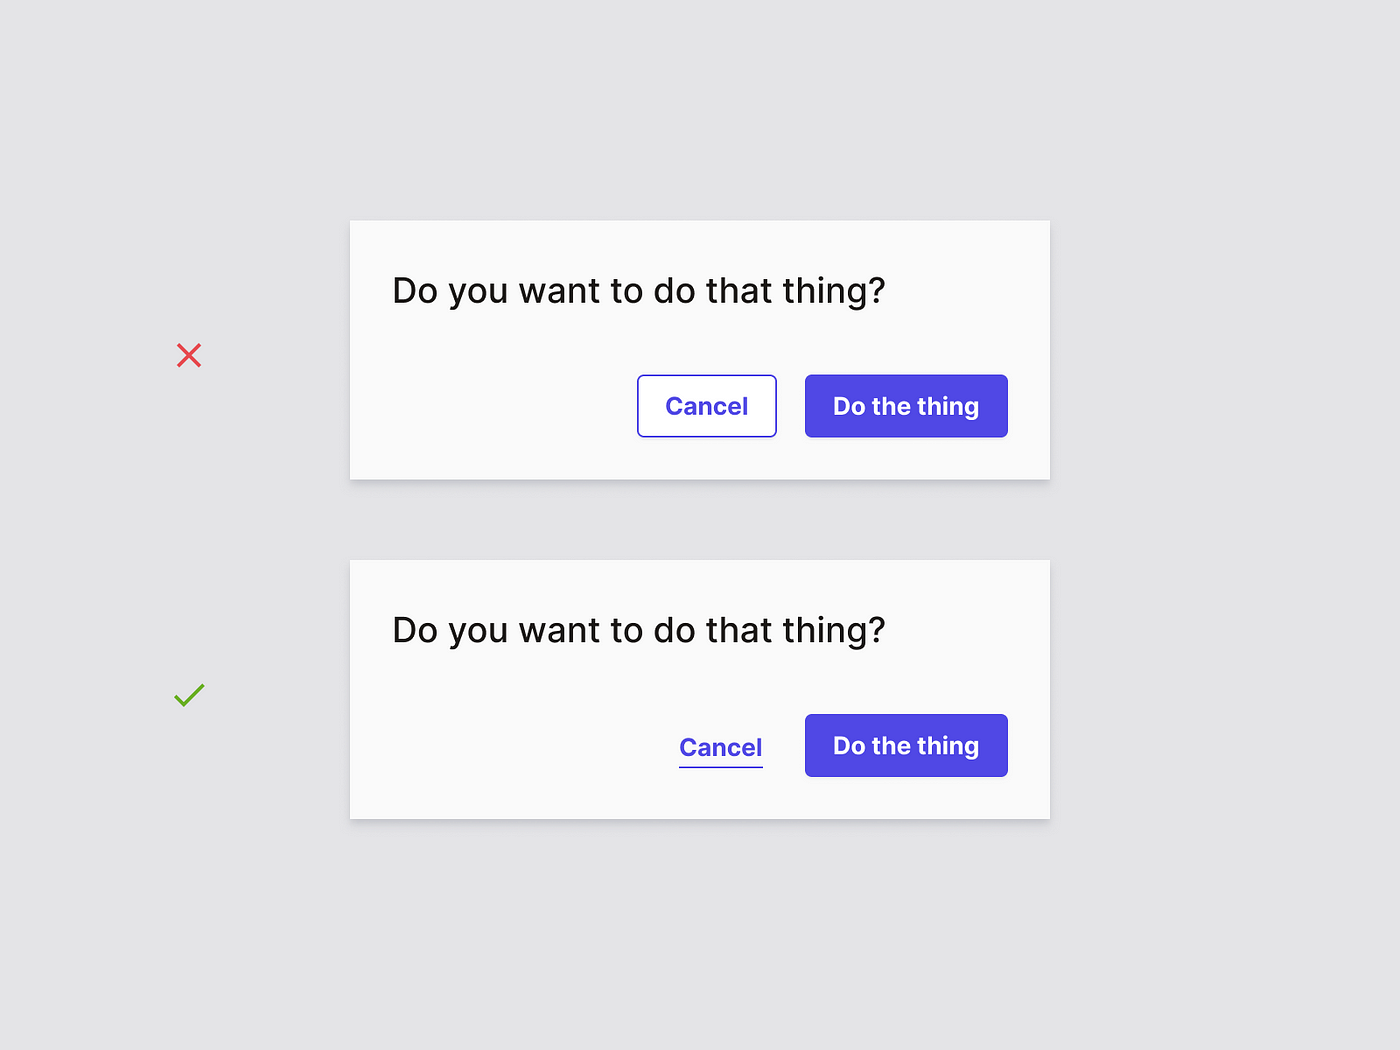 Cancel as a button or a link? Which is best UX practice?, by Karim Maassen